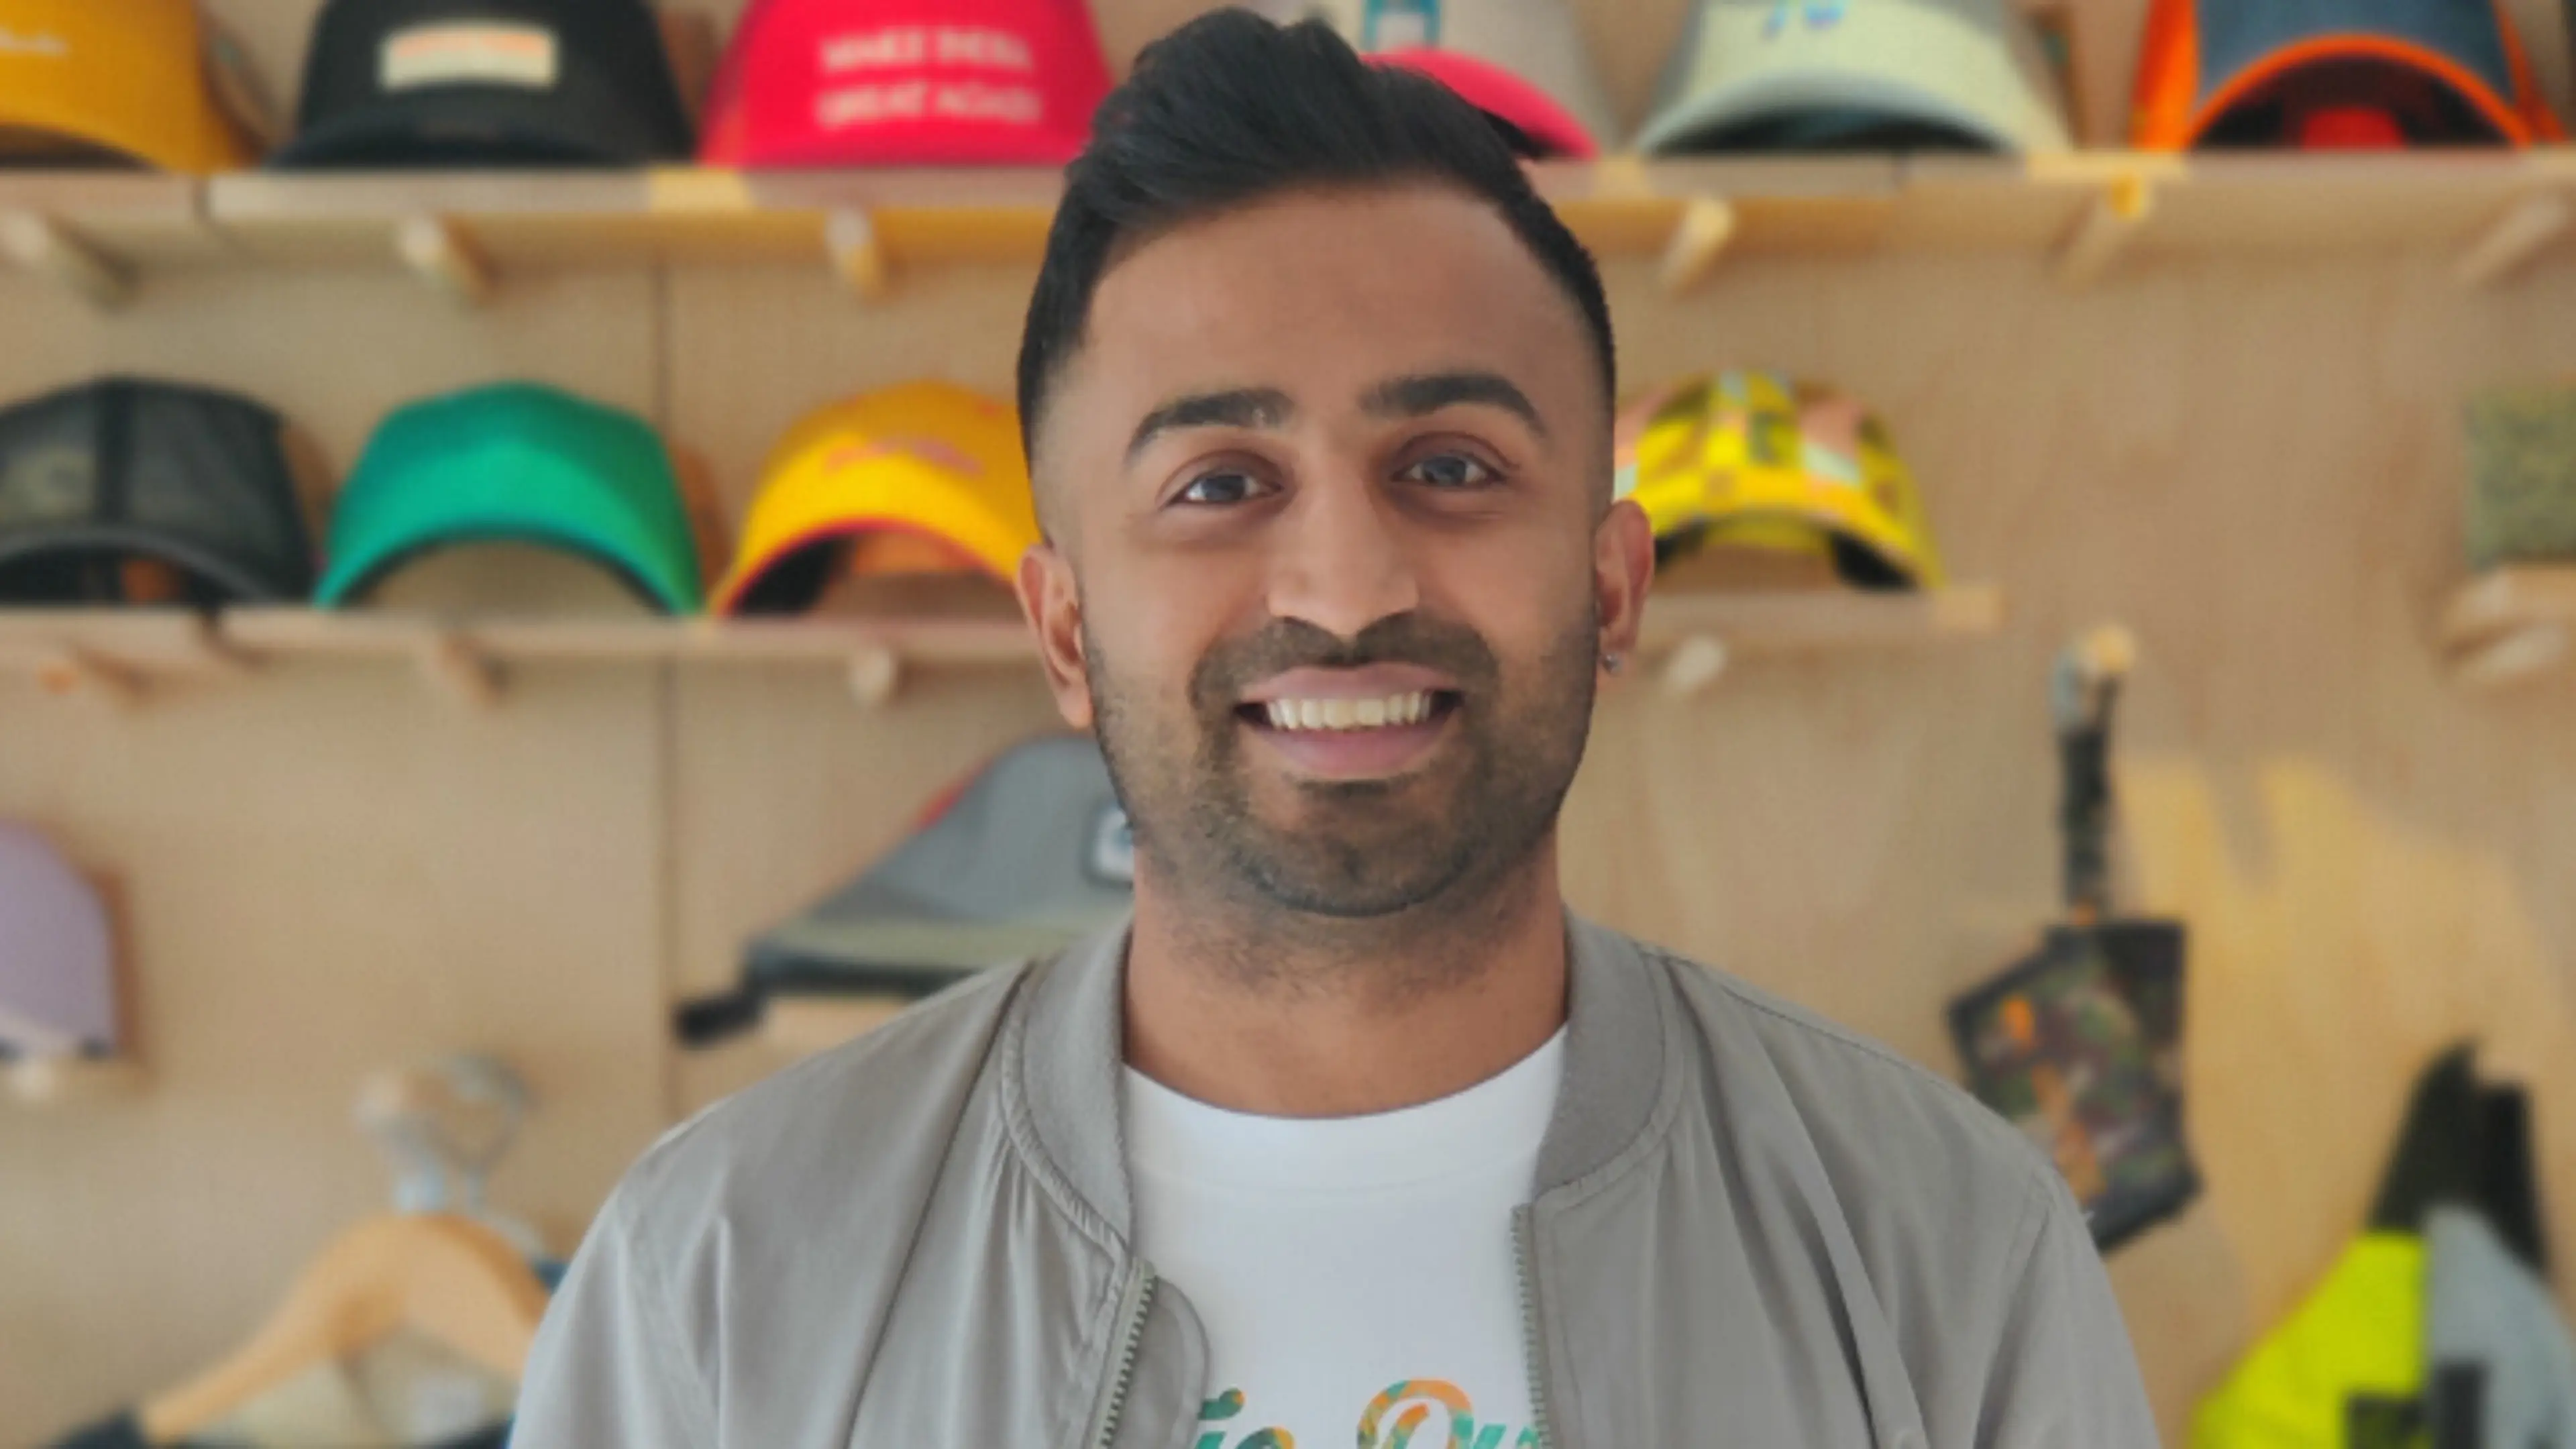 In just 5 years, this entrepreneur built a Rs 5 Cr hip-hop products brand catering to underground artists